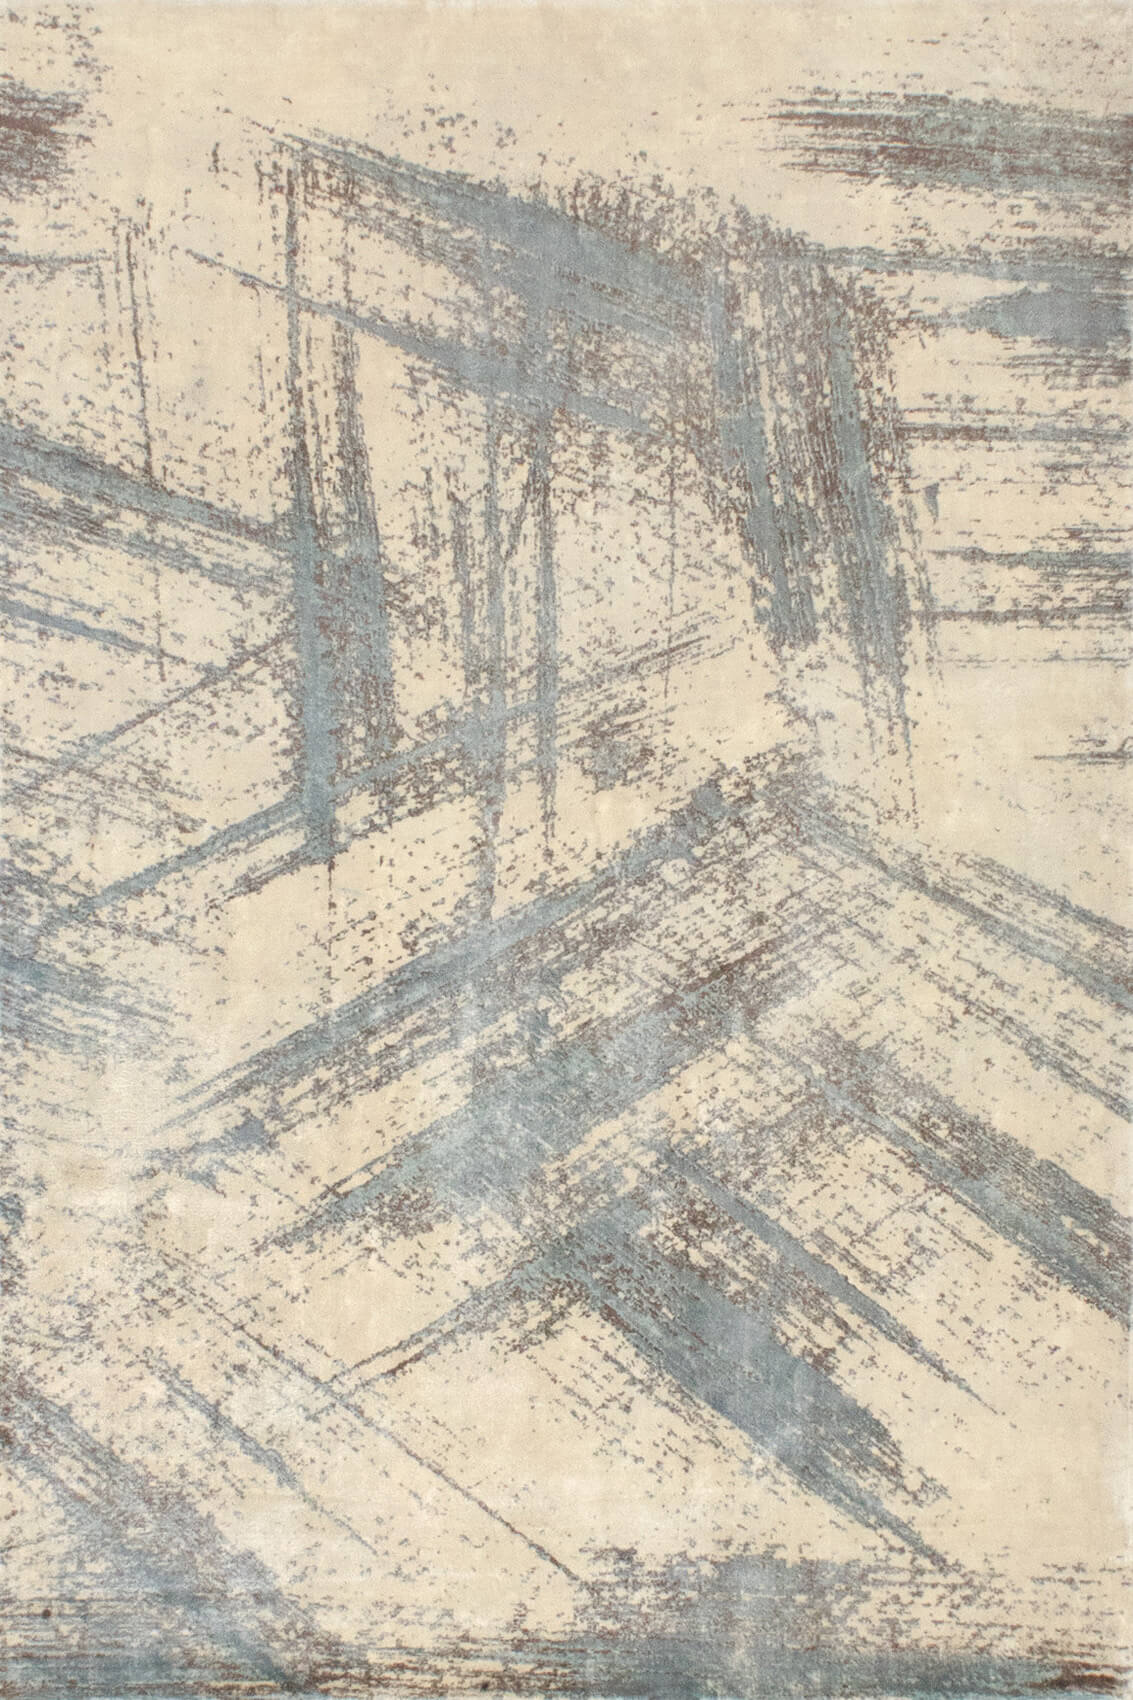 Messy Rug by Serge Lesage ☞ Size: 170 x 240 cm